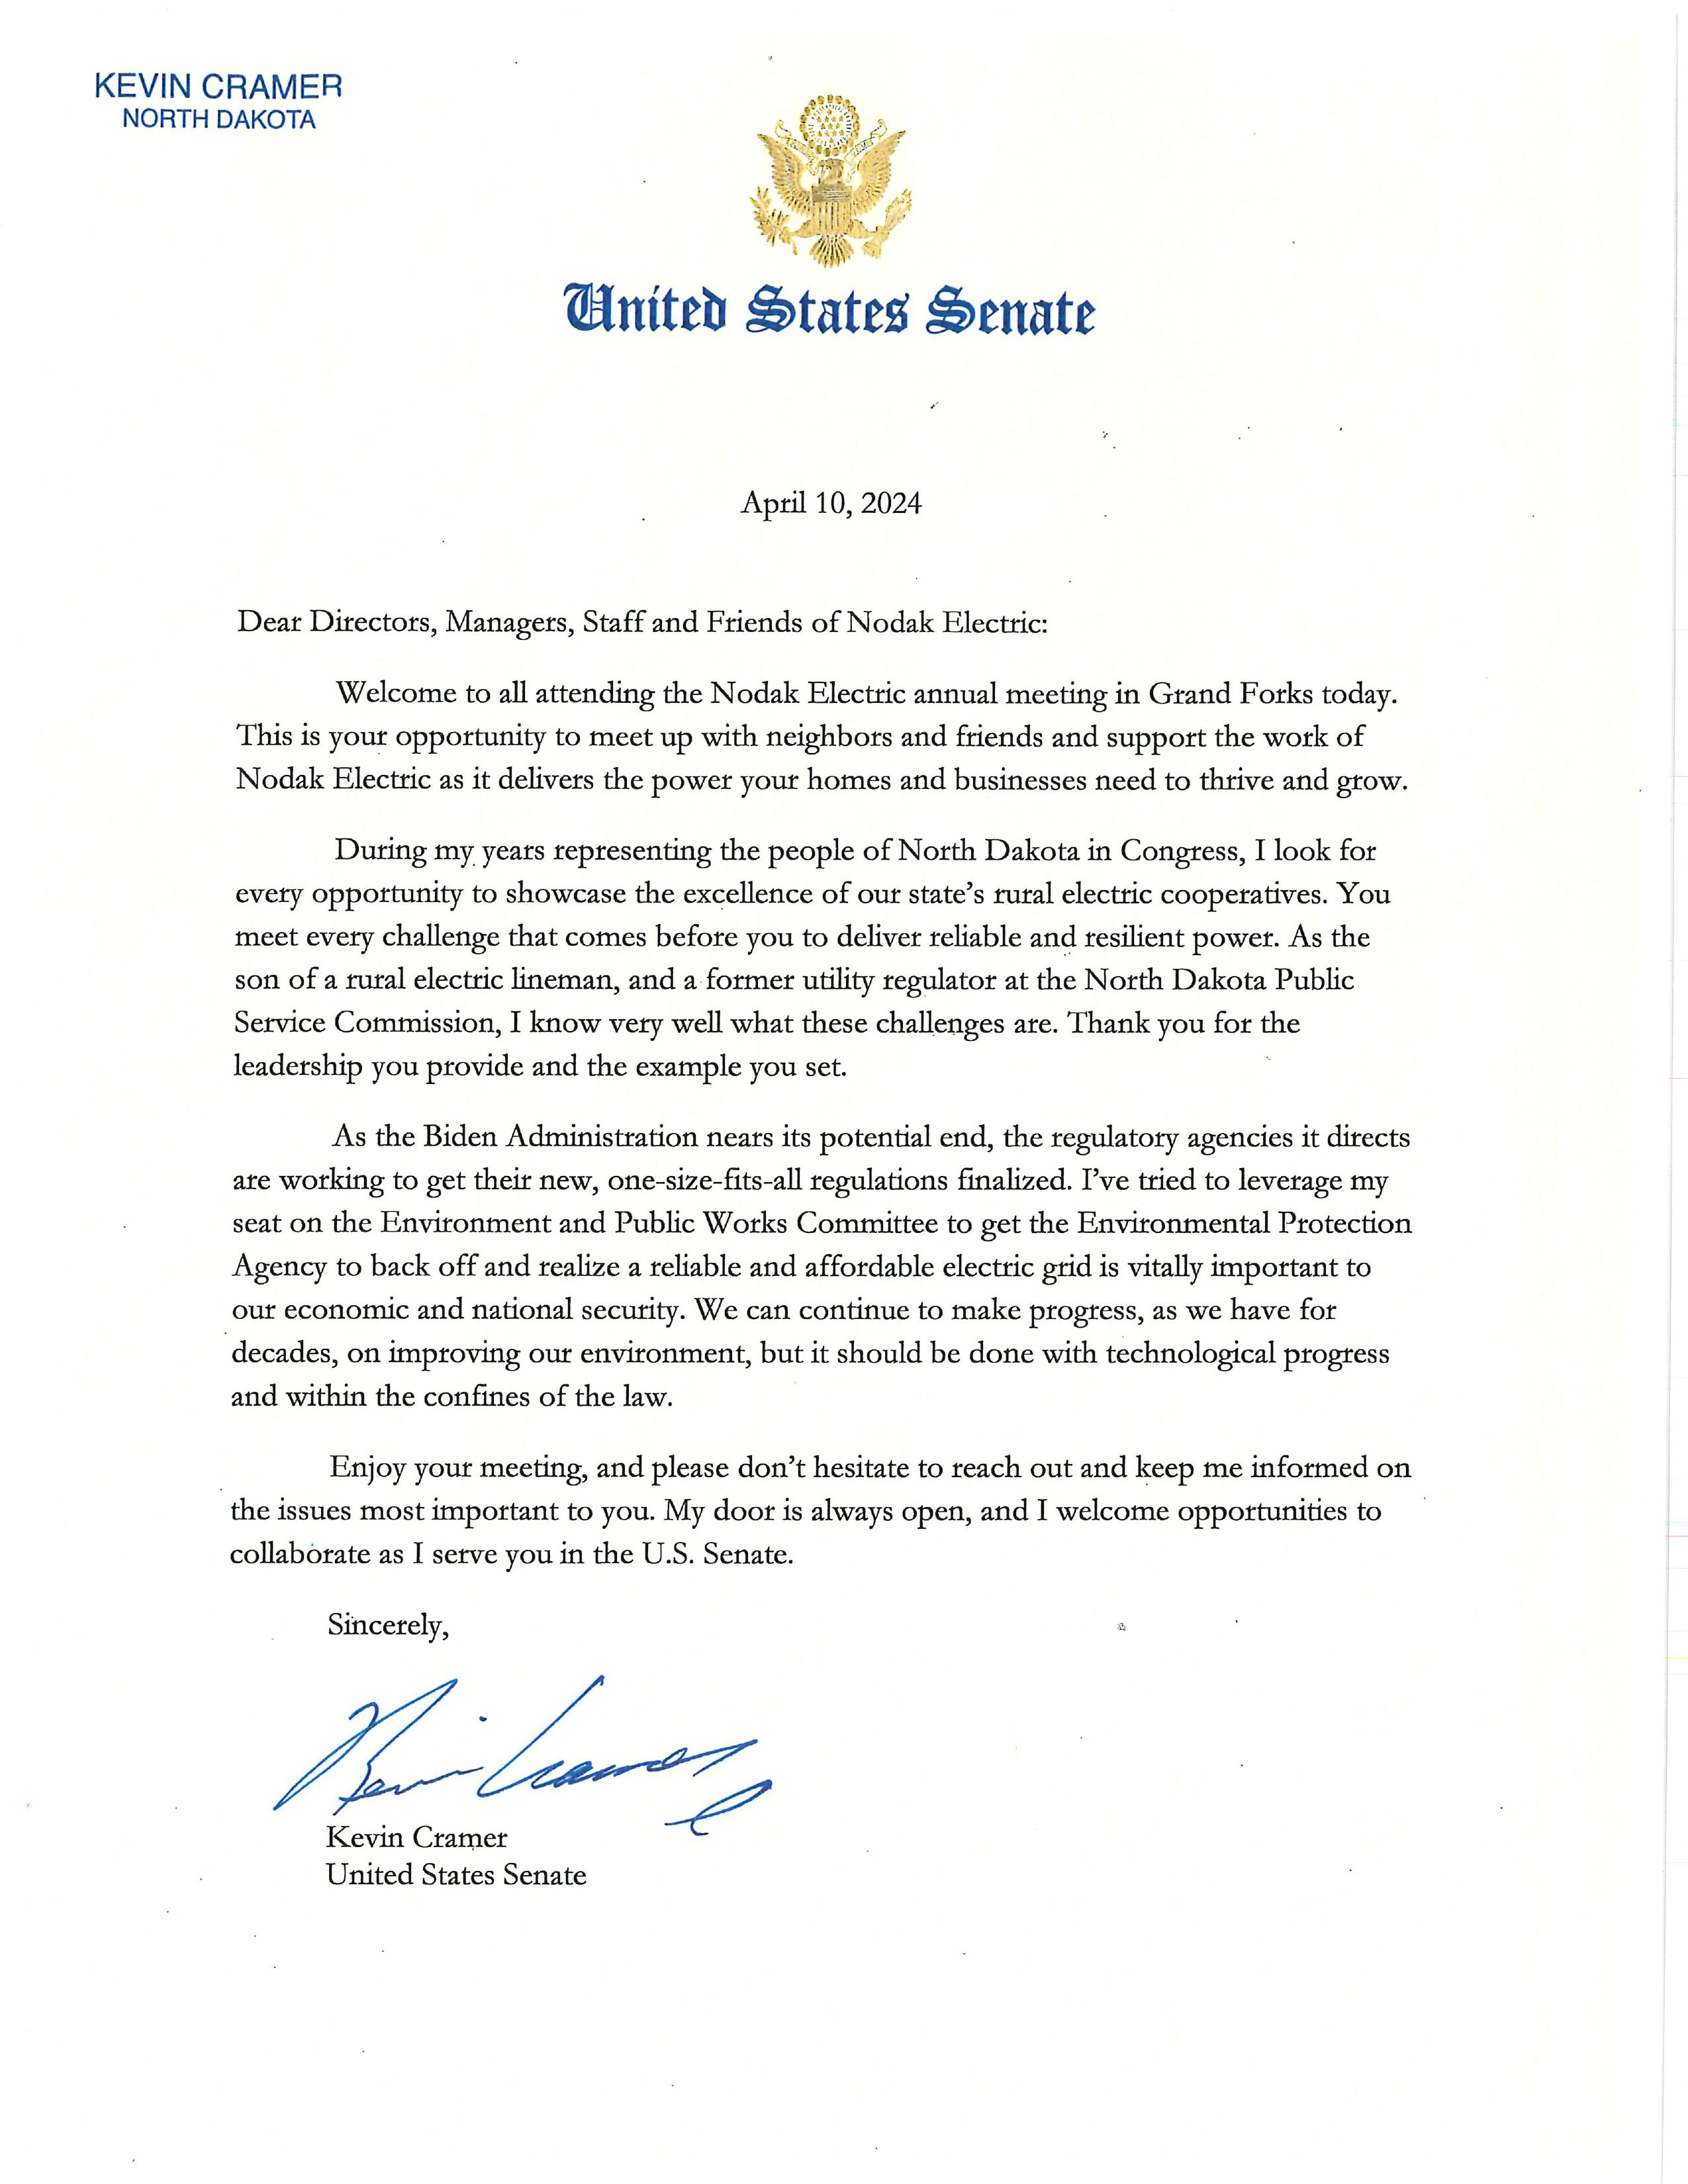 A Letter from Kevin Cramer